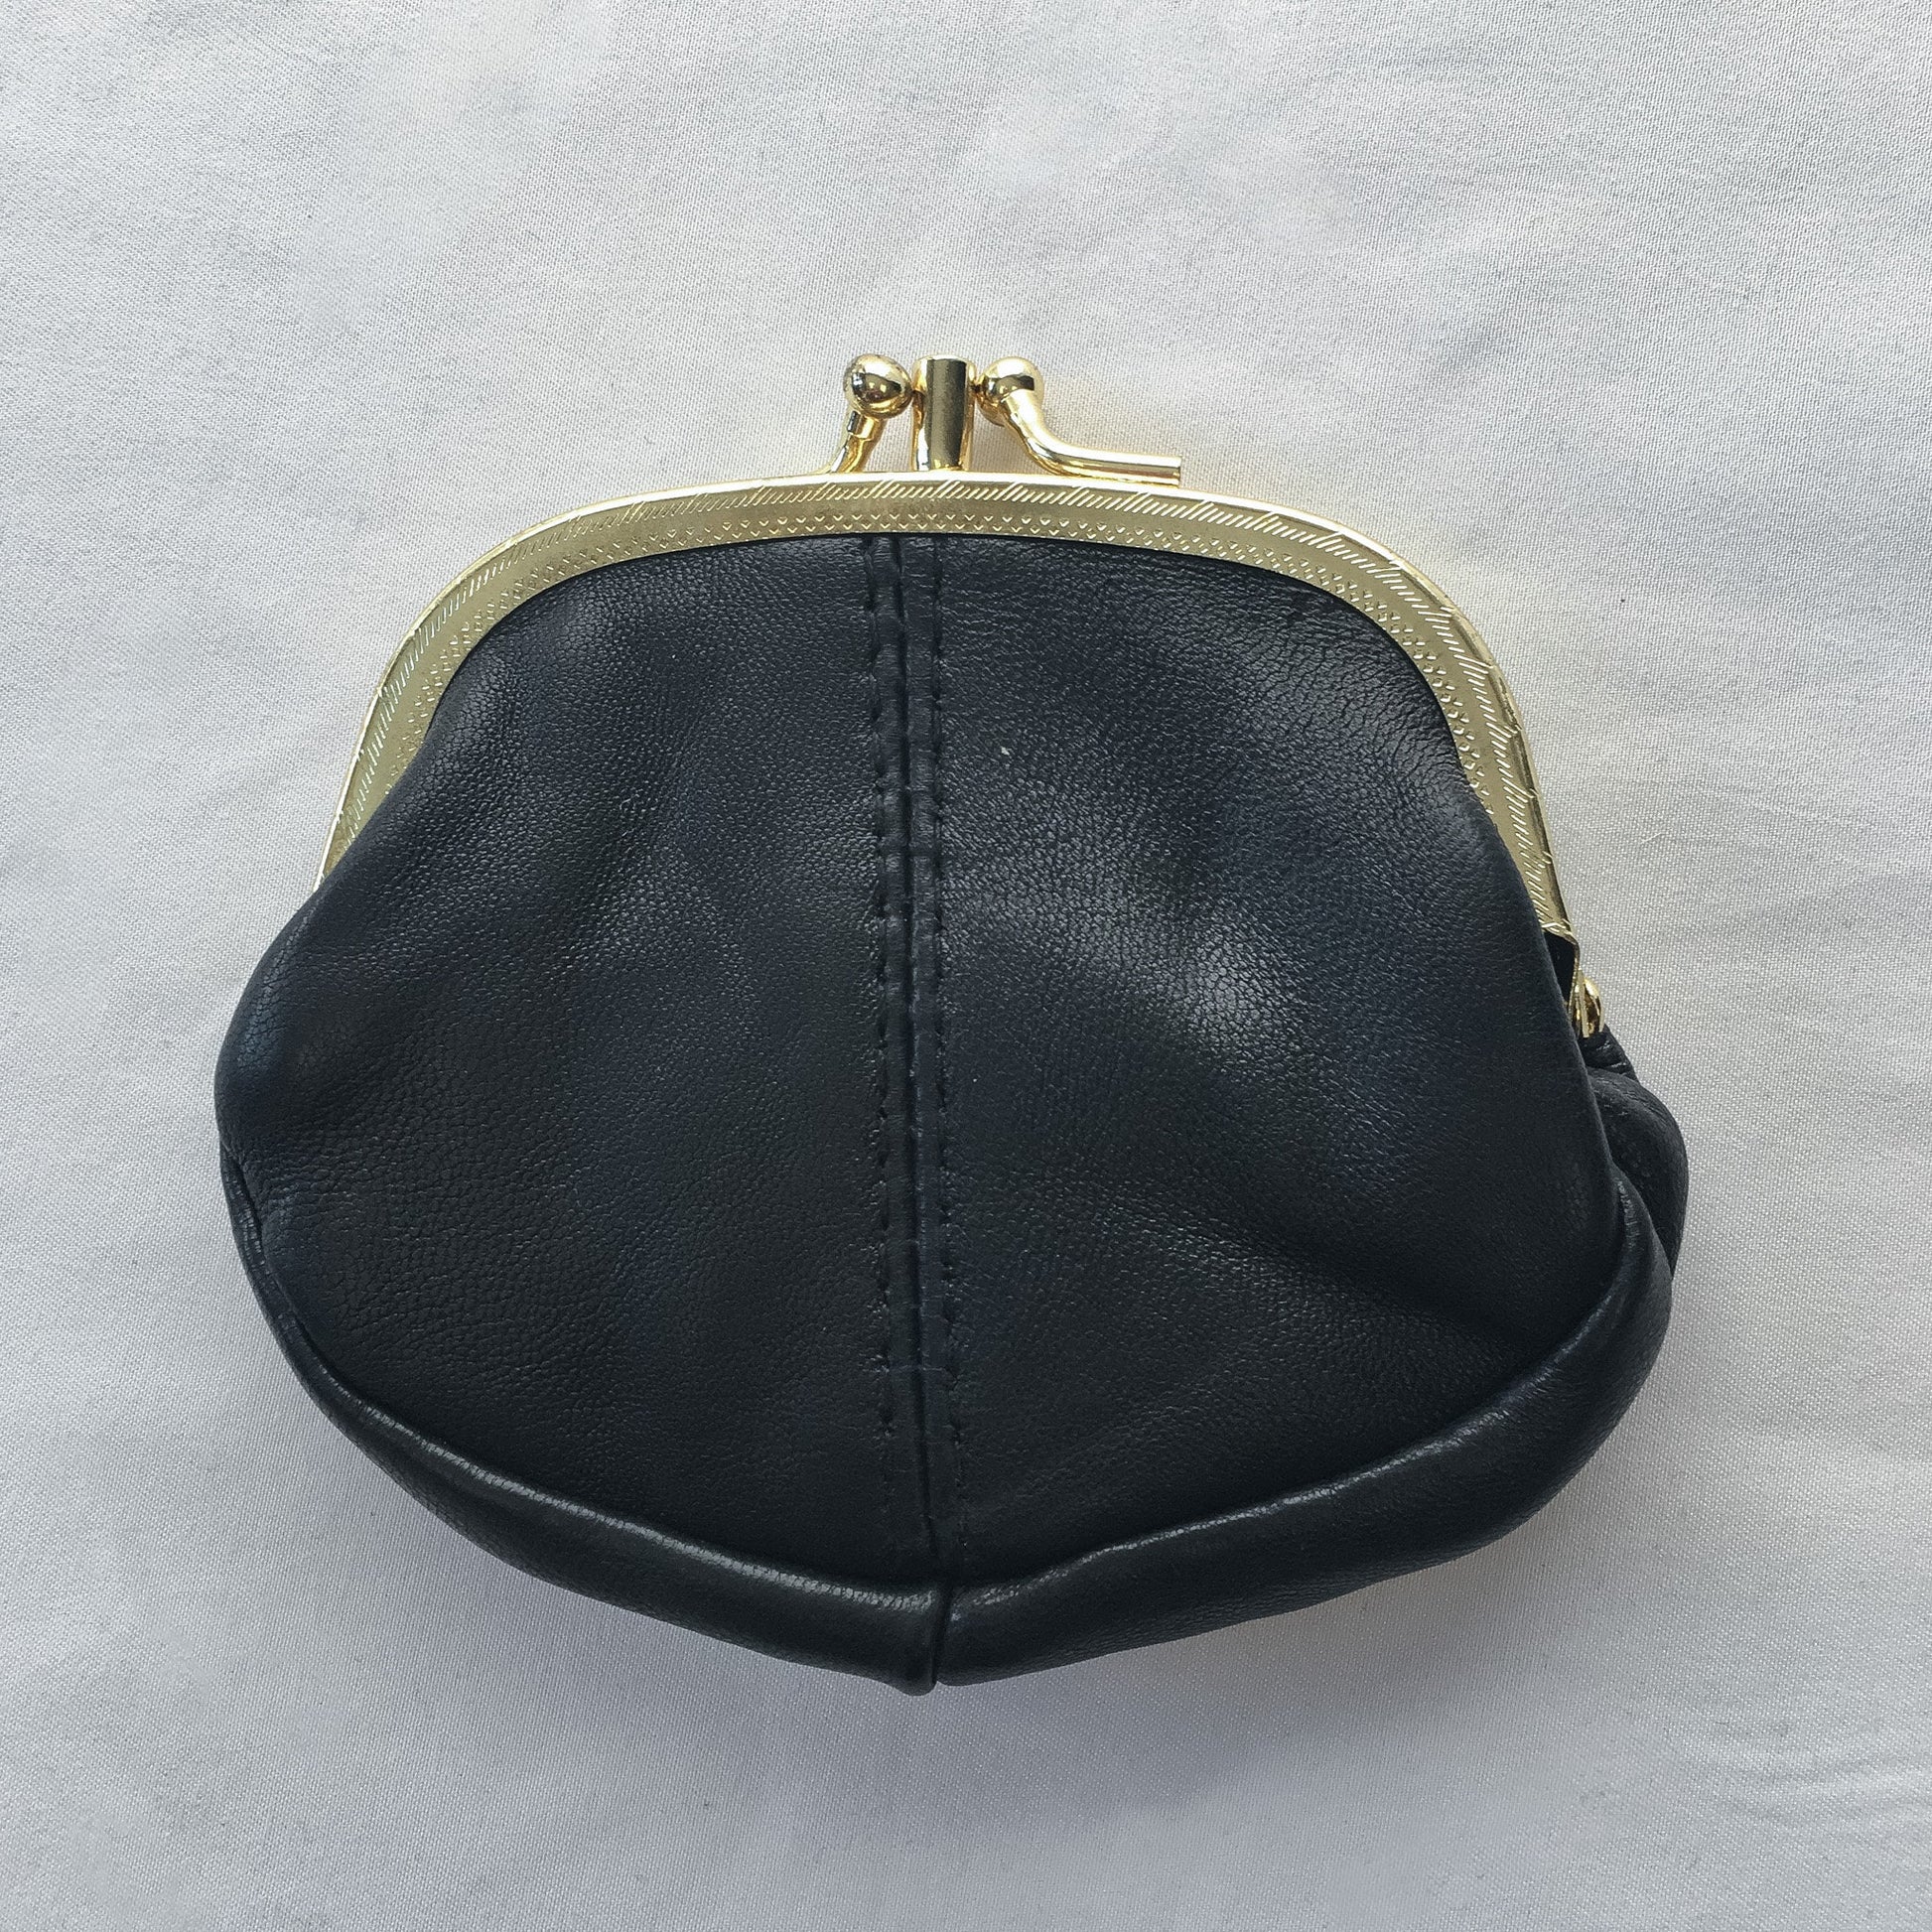 Vintage Black Two-Pocket Faux Leather Coin Purse with Gold Metal Enclosure